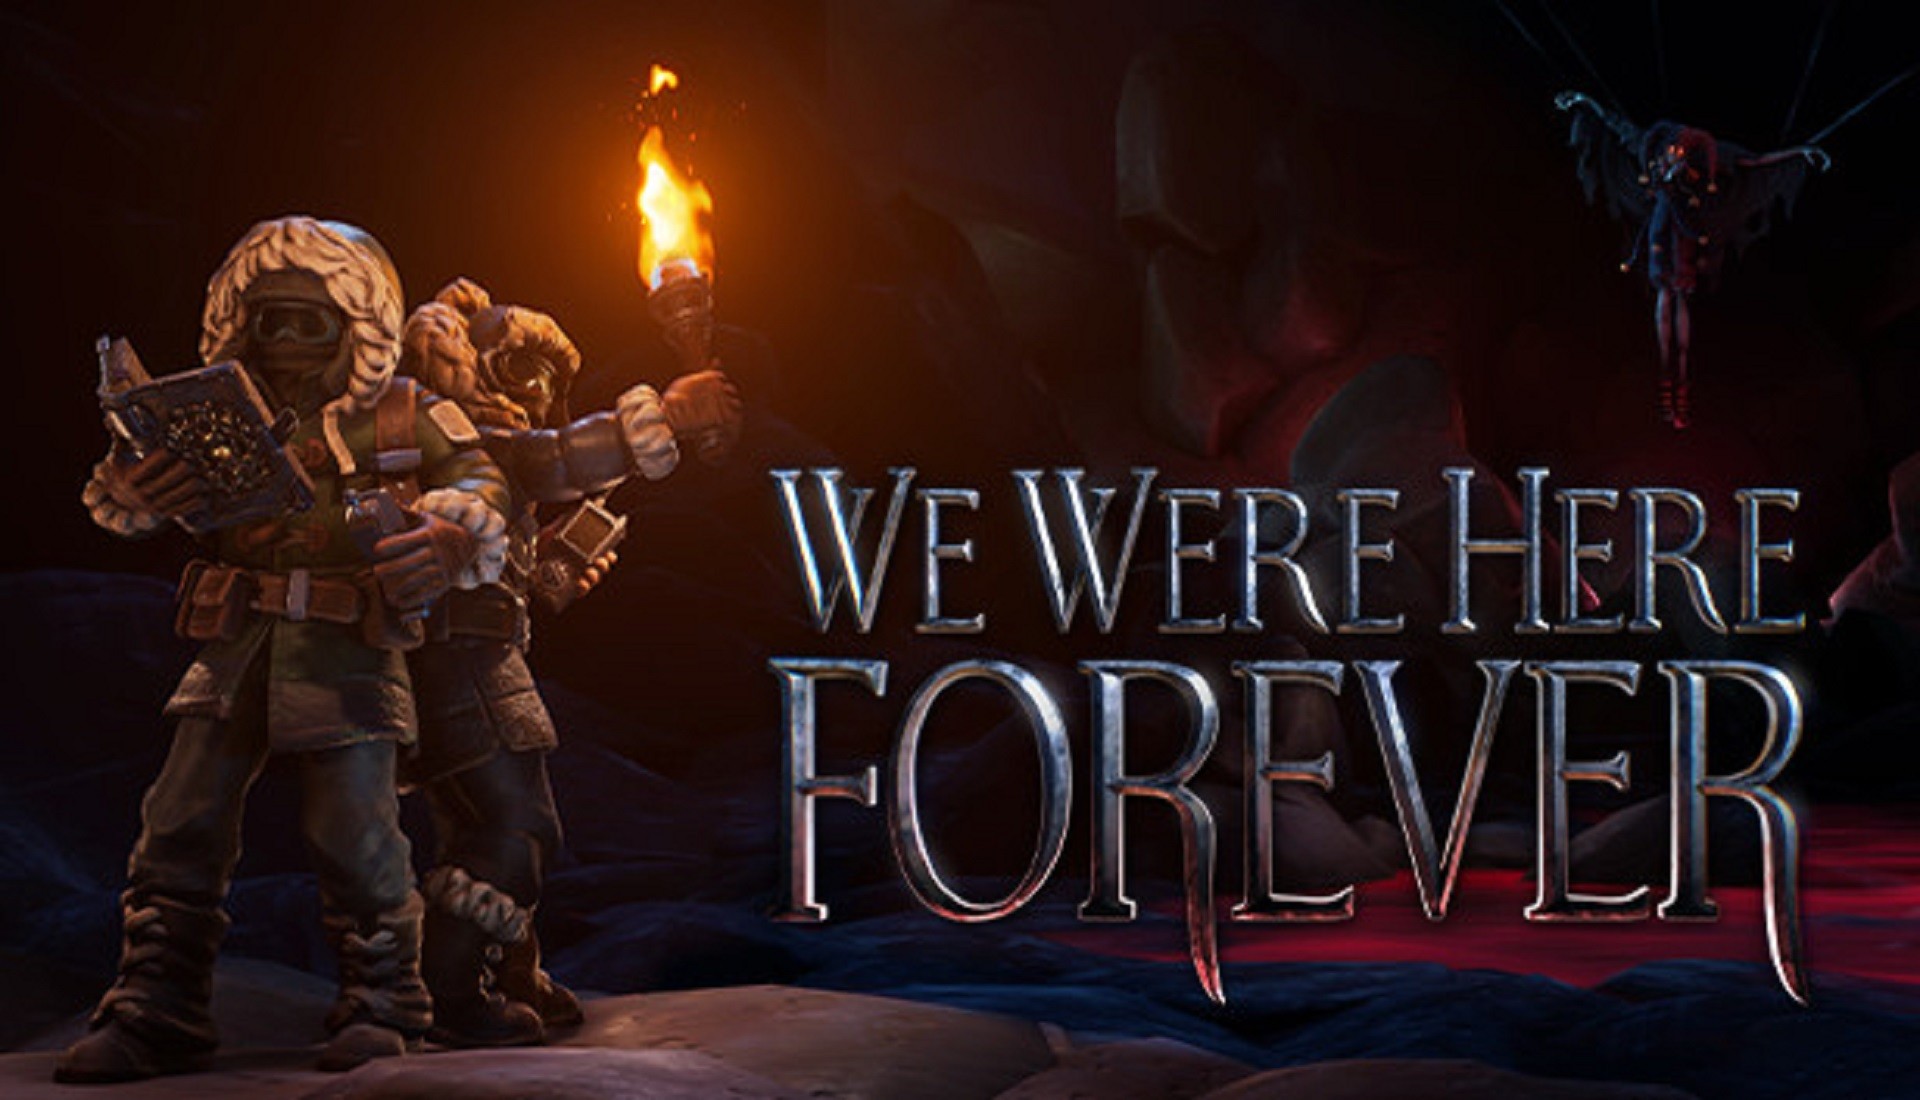 Wills to try games. Игра we were here together. We were here Forever. We were here Forever арт. We are here Forever игра.